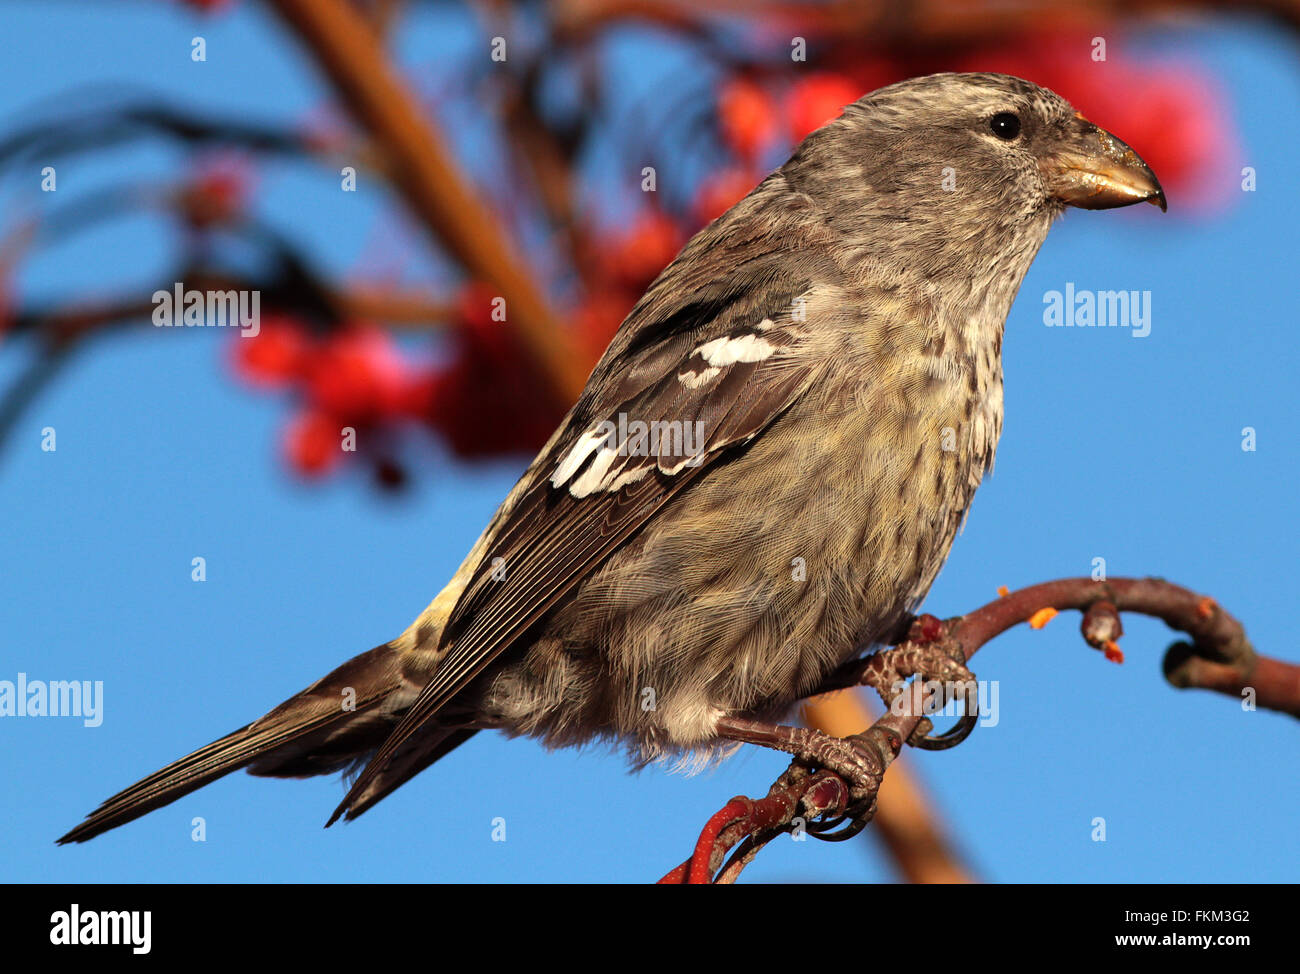 Young Two-barred crossbill, White-winged crossbill, Loxia leucoptera eating red berries Stock Photo